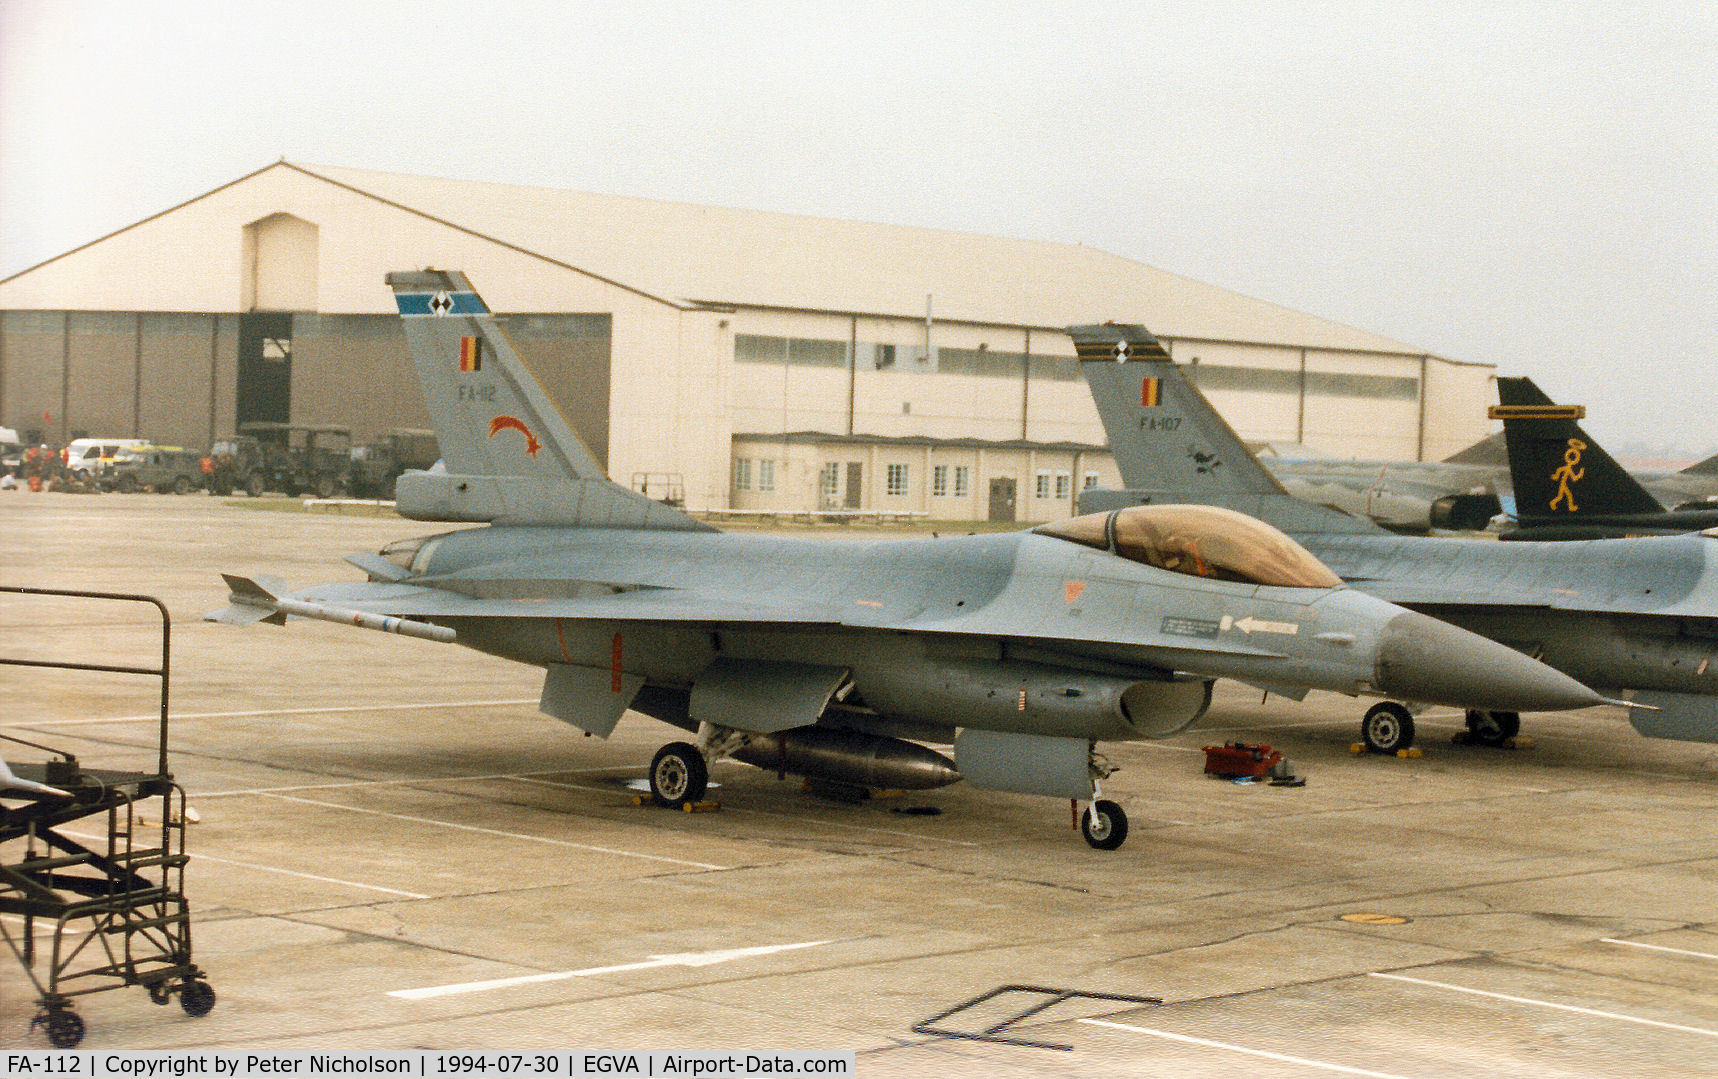 FA-112, 1989 SABCA F-16AM Fighting Falcon C/N 6H-112, F-16A Falcon, callsign Viper, of 1 Squadron of the 2nd Wing Belgian Air Force on the flight-line at the 1994 Intnl Air Tattoo at RAF Fairford.